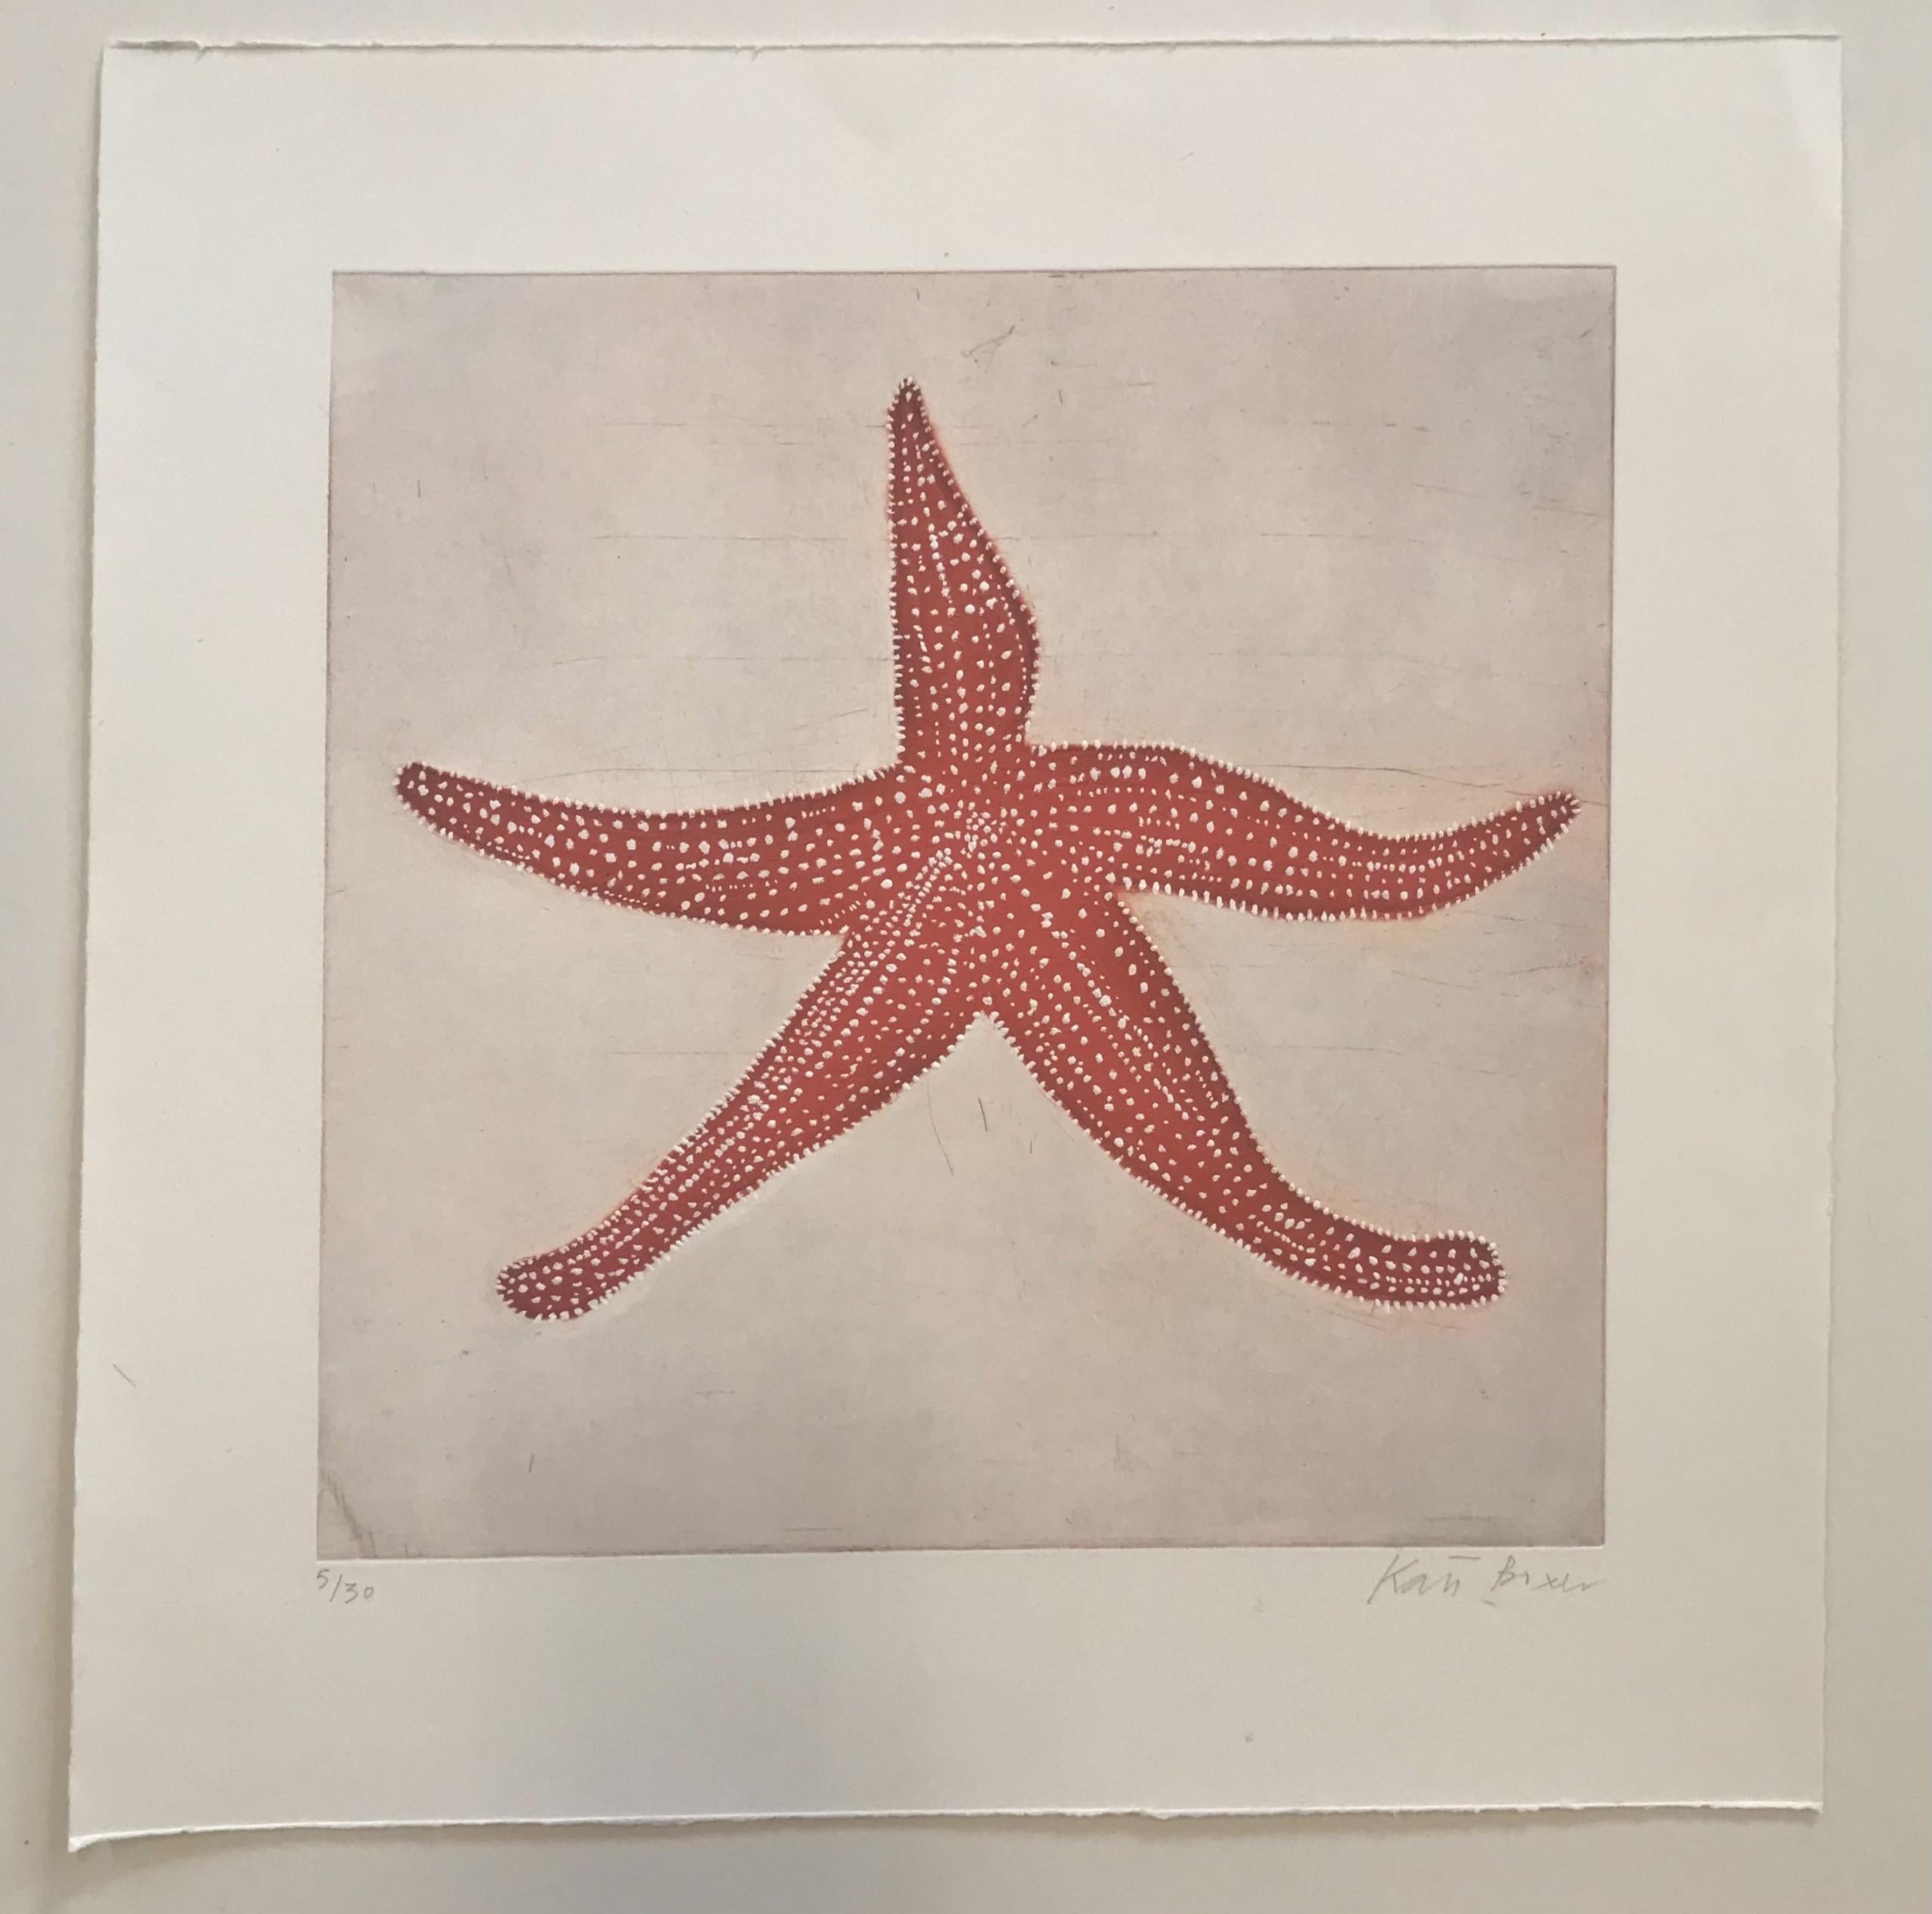 Starfish is a hand coloured limited edition drypoint etching with carborundum on paper by Kate Boxer. Starfish is printed in a warm terracotta tone with delicate white dots which give the contemporary artwork a refined finish. Kate Boxer makes the